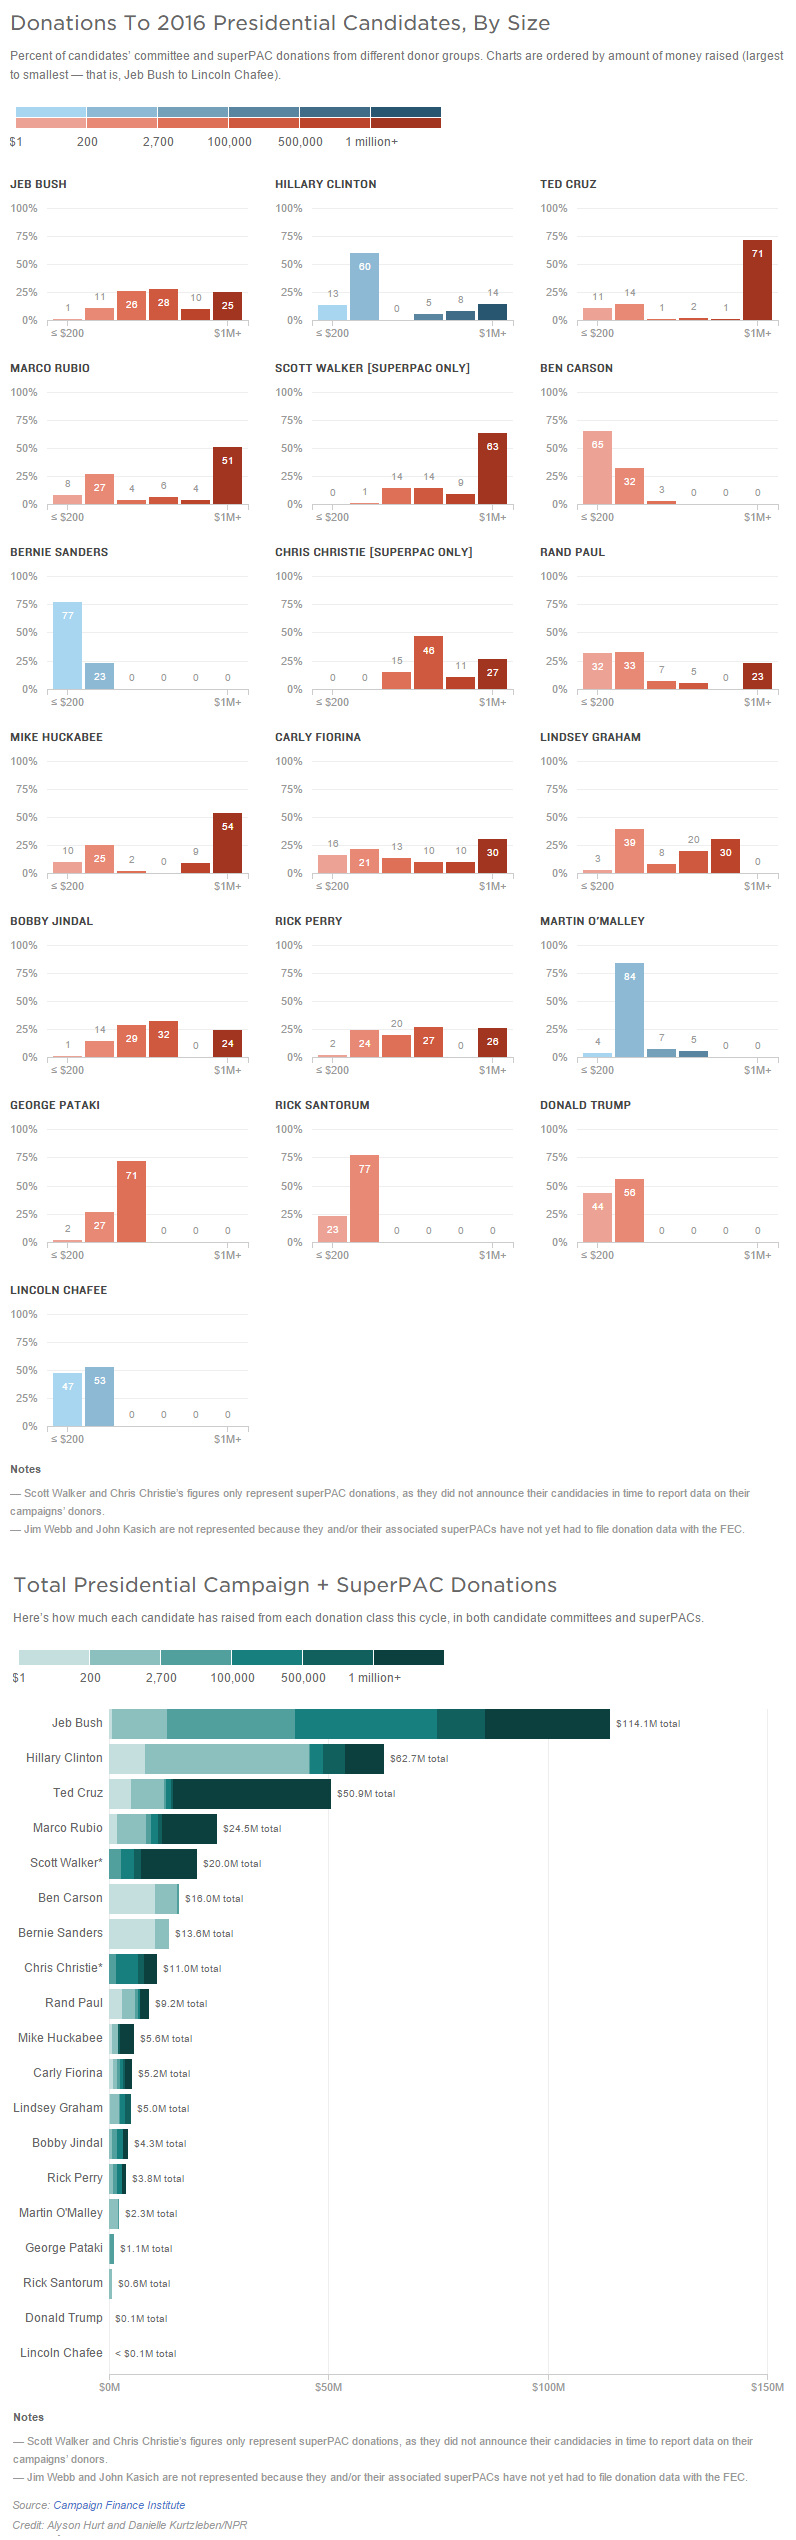 How the 2016 Presidential Candidates are Getting Their Money